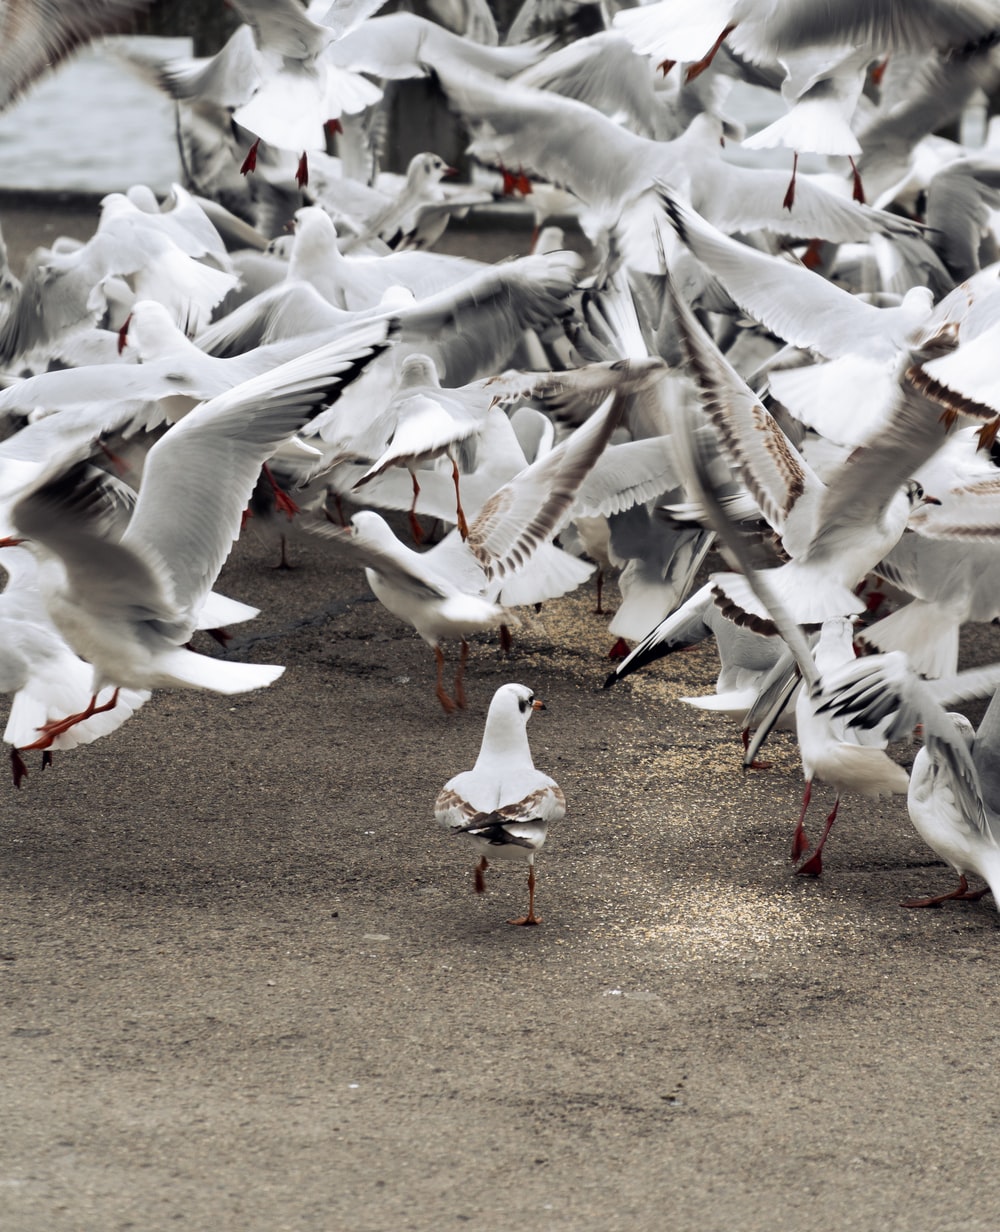 A solitary bird is walking, while a crowd of other birds surrounding it are taking off. The birds are white-ish, and have gray and black markings. Most of the frame is taken up by birds in flight.